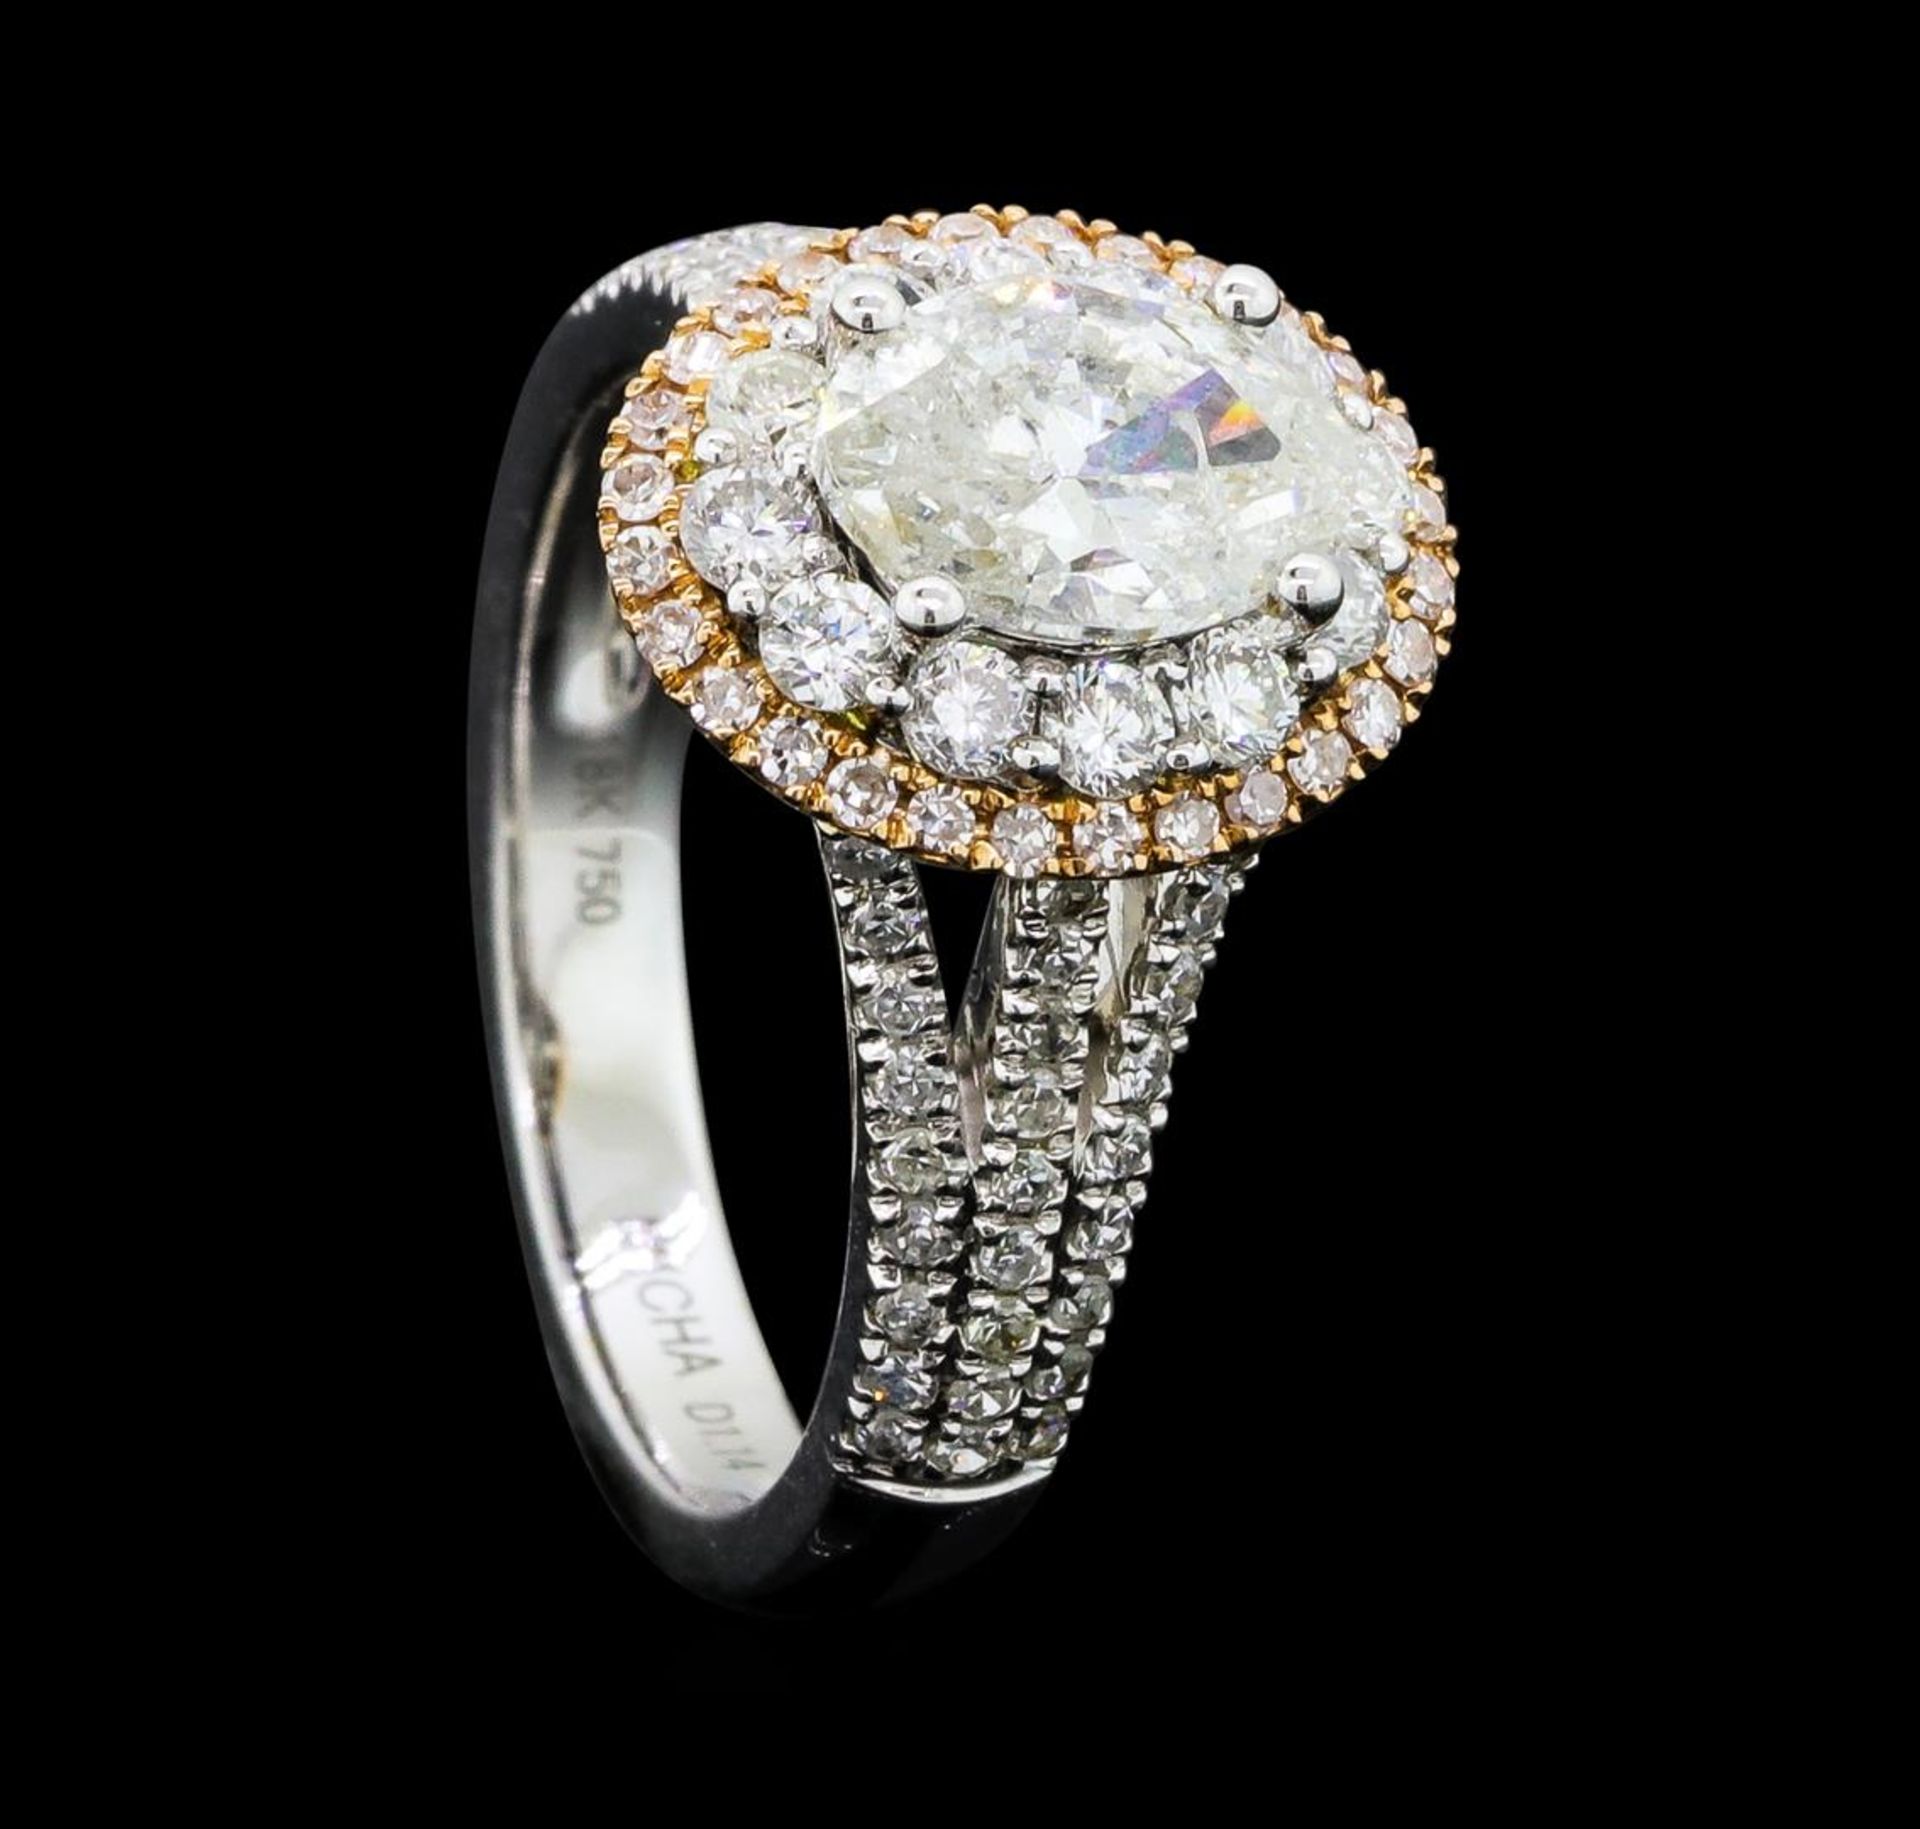 1.54 ctw Diamond Ring - 18KT White And Yellow Gold - Image 4 of 5